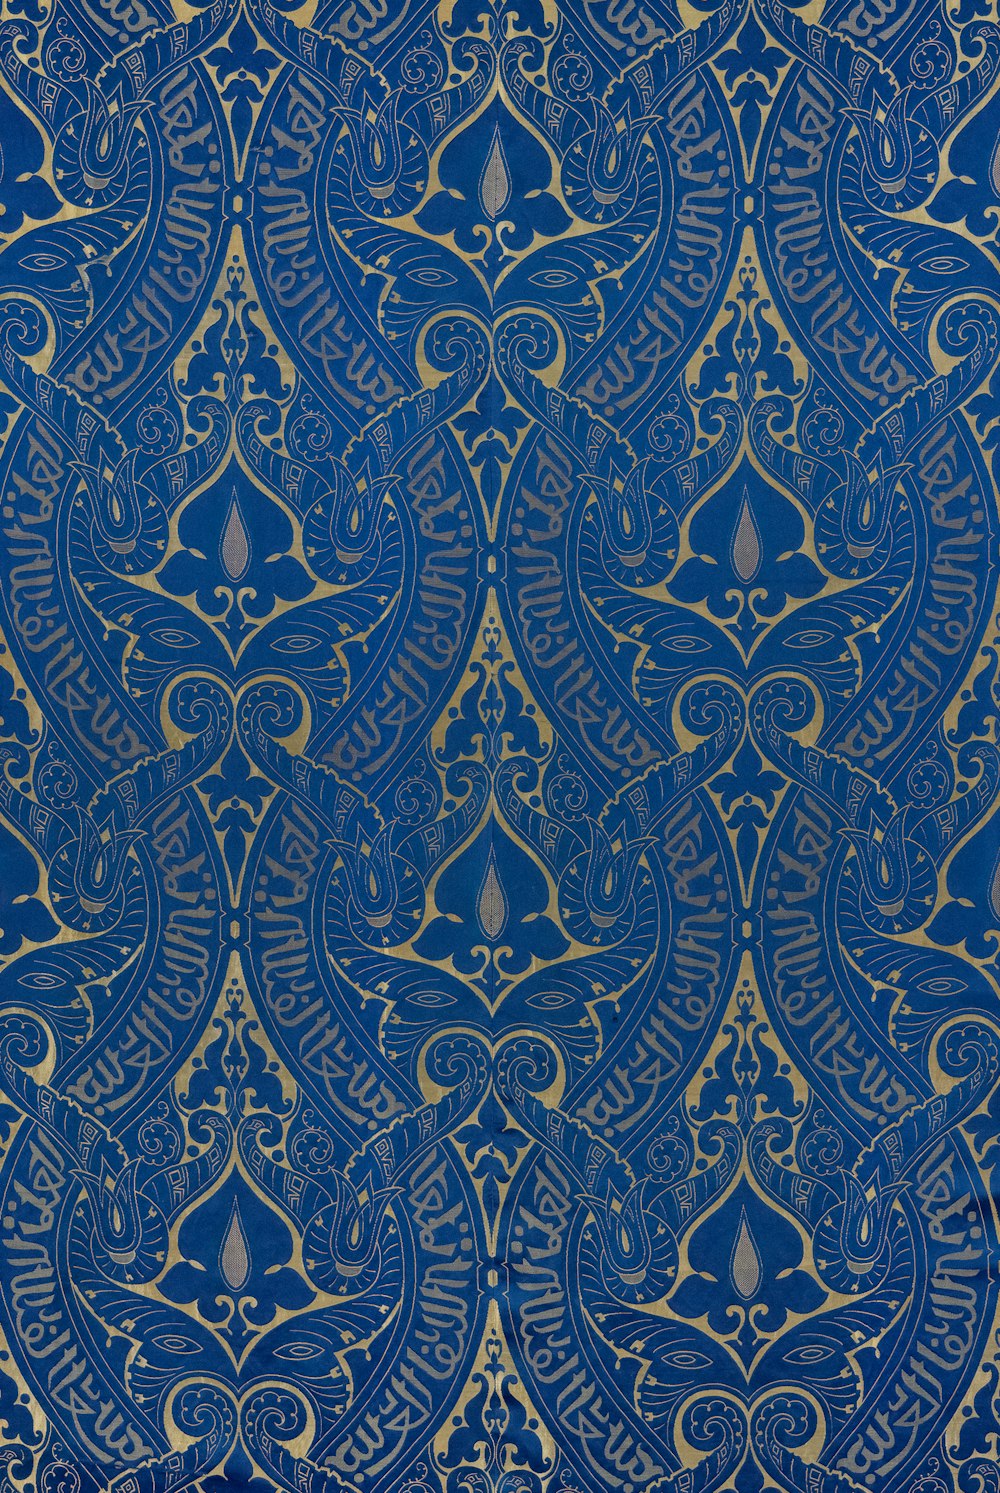 a blue and gold wallpaper with ornate designs